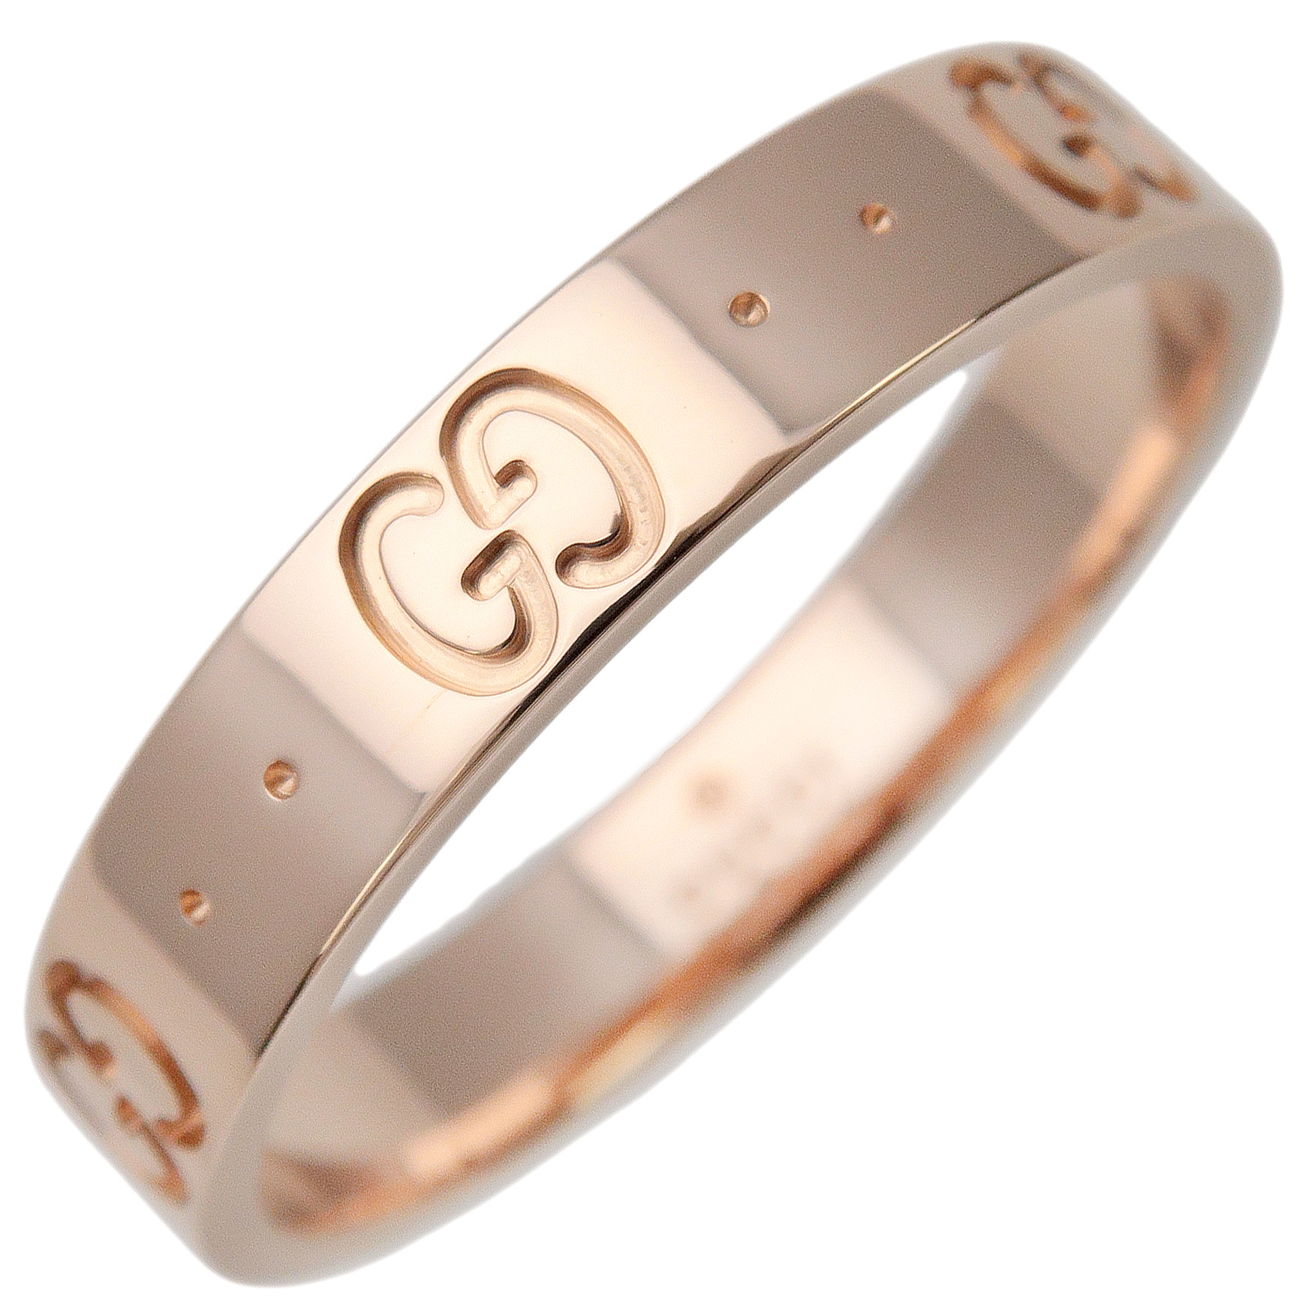 GUCCI-Icon-Ring-K18PG-750PG-Rose-Gold-#20-US9-9.5-EU60